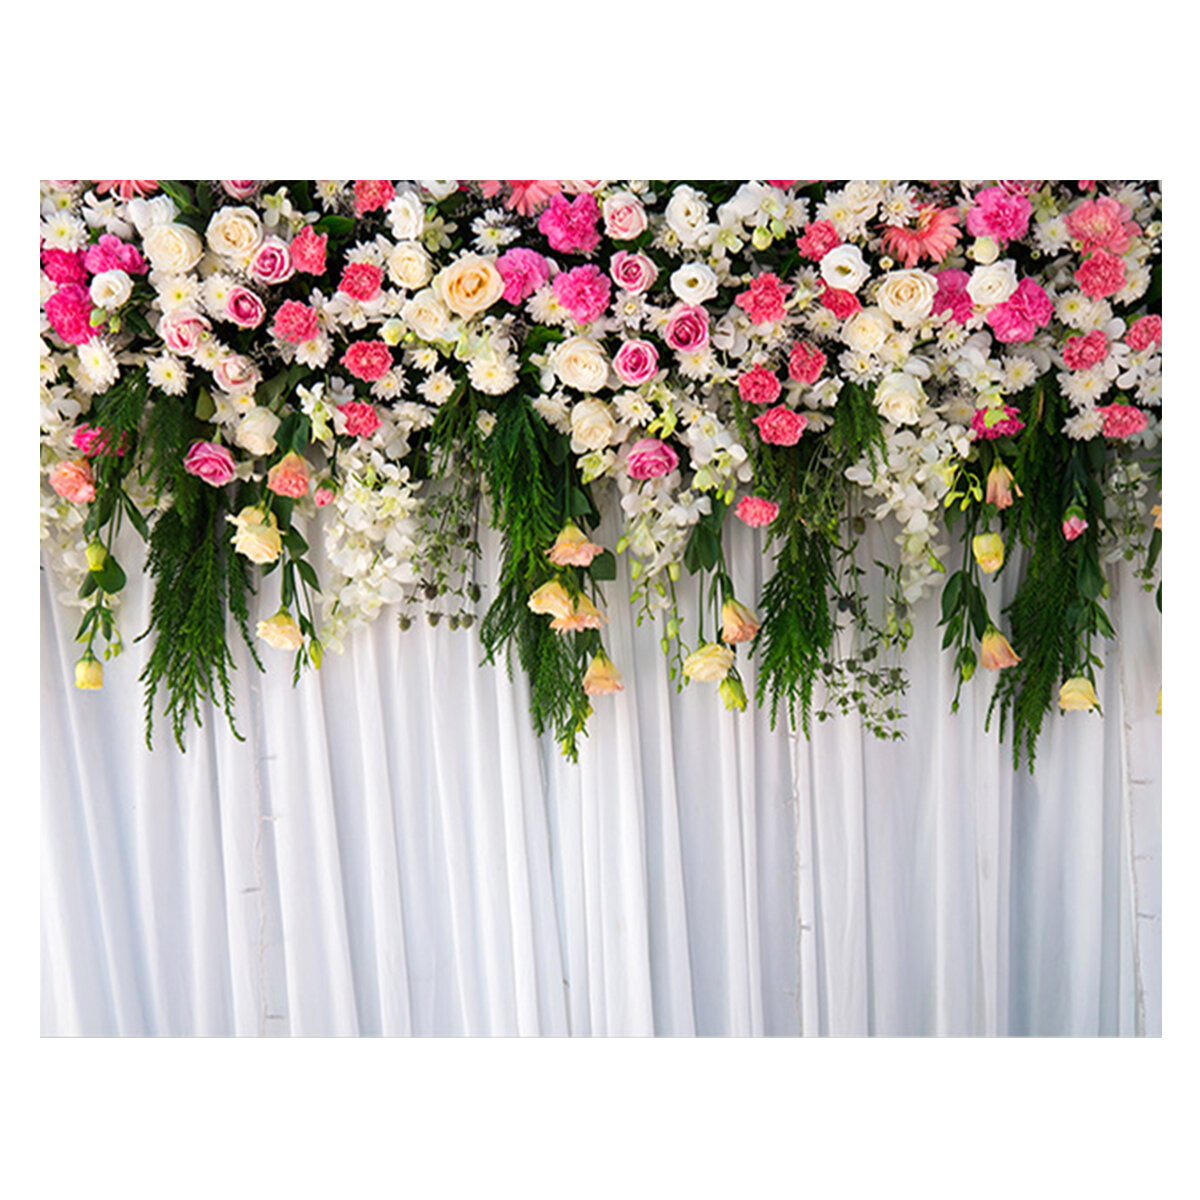 5x3FT 7x5FT Flower Wall Studio Silk Backdrop Photography Prop Photo Background